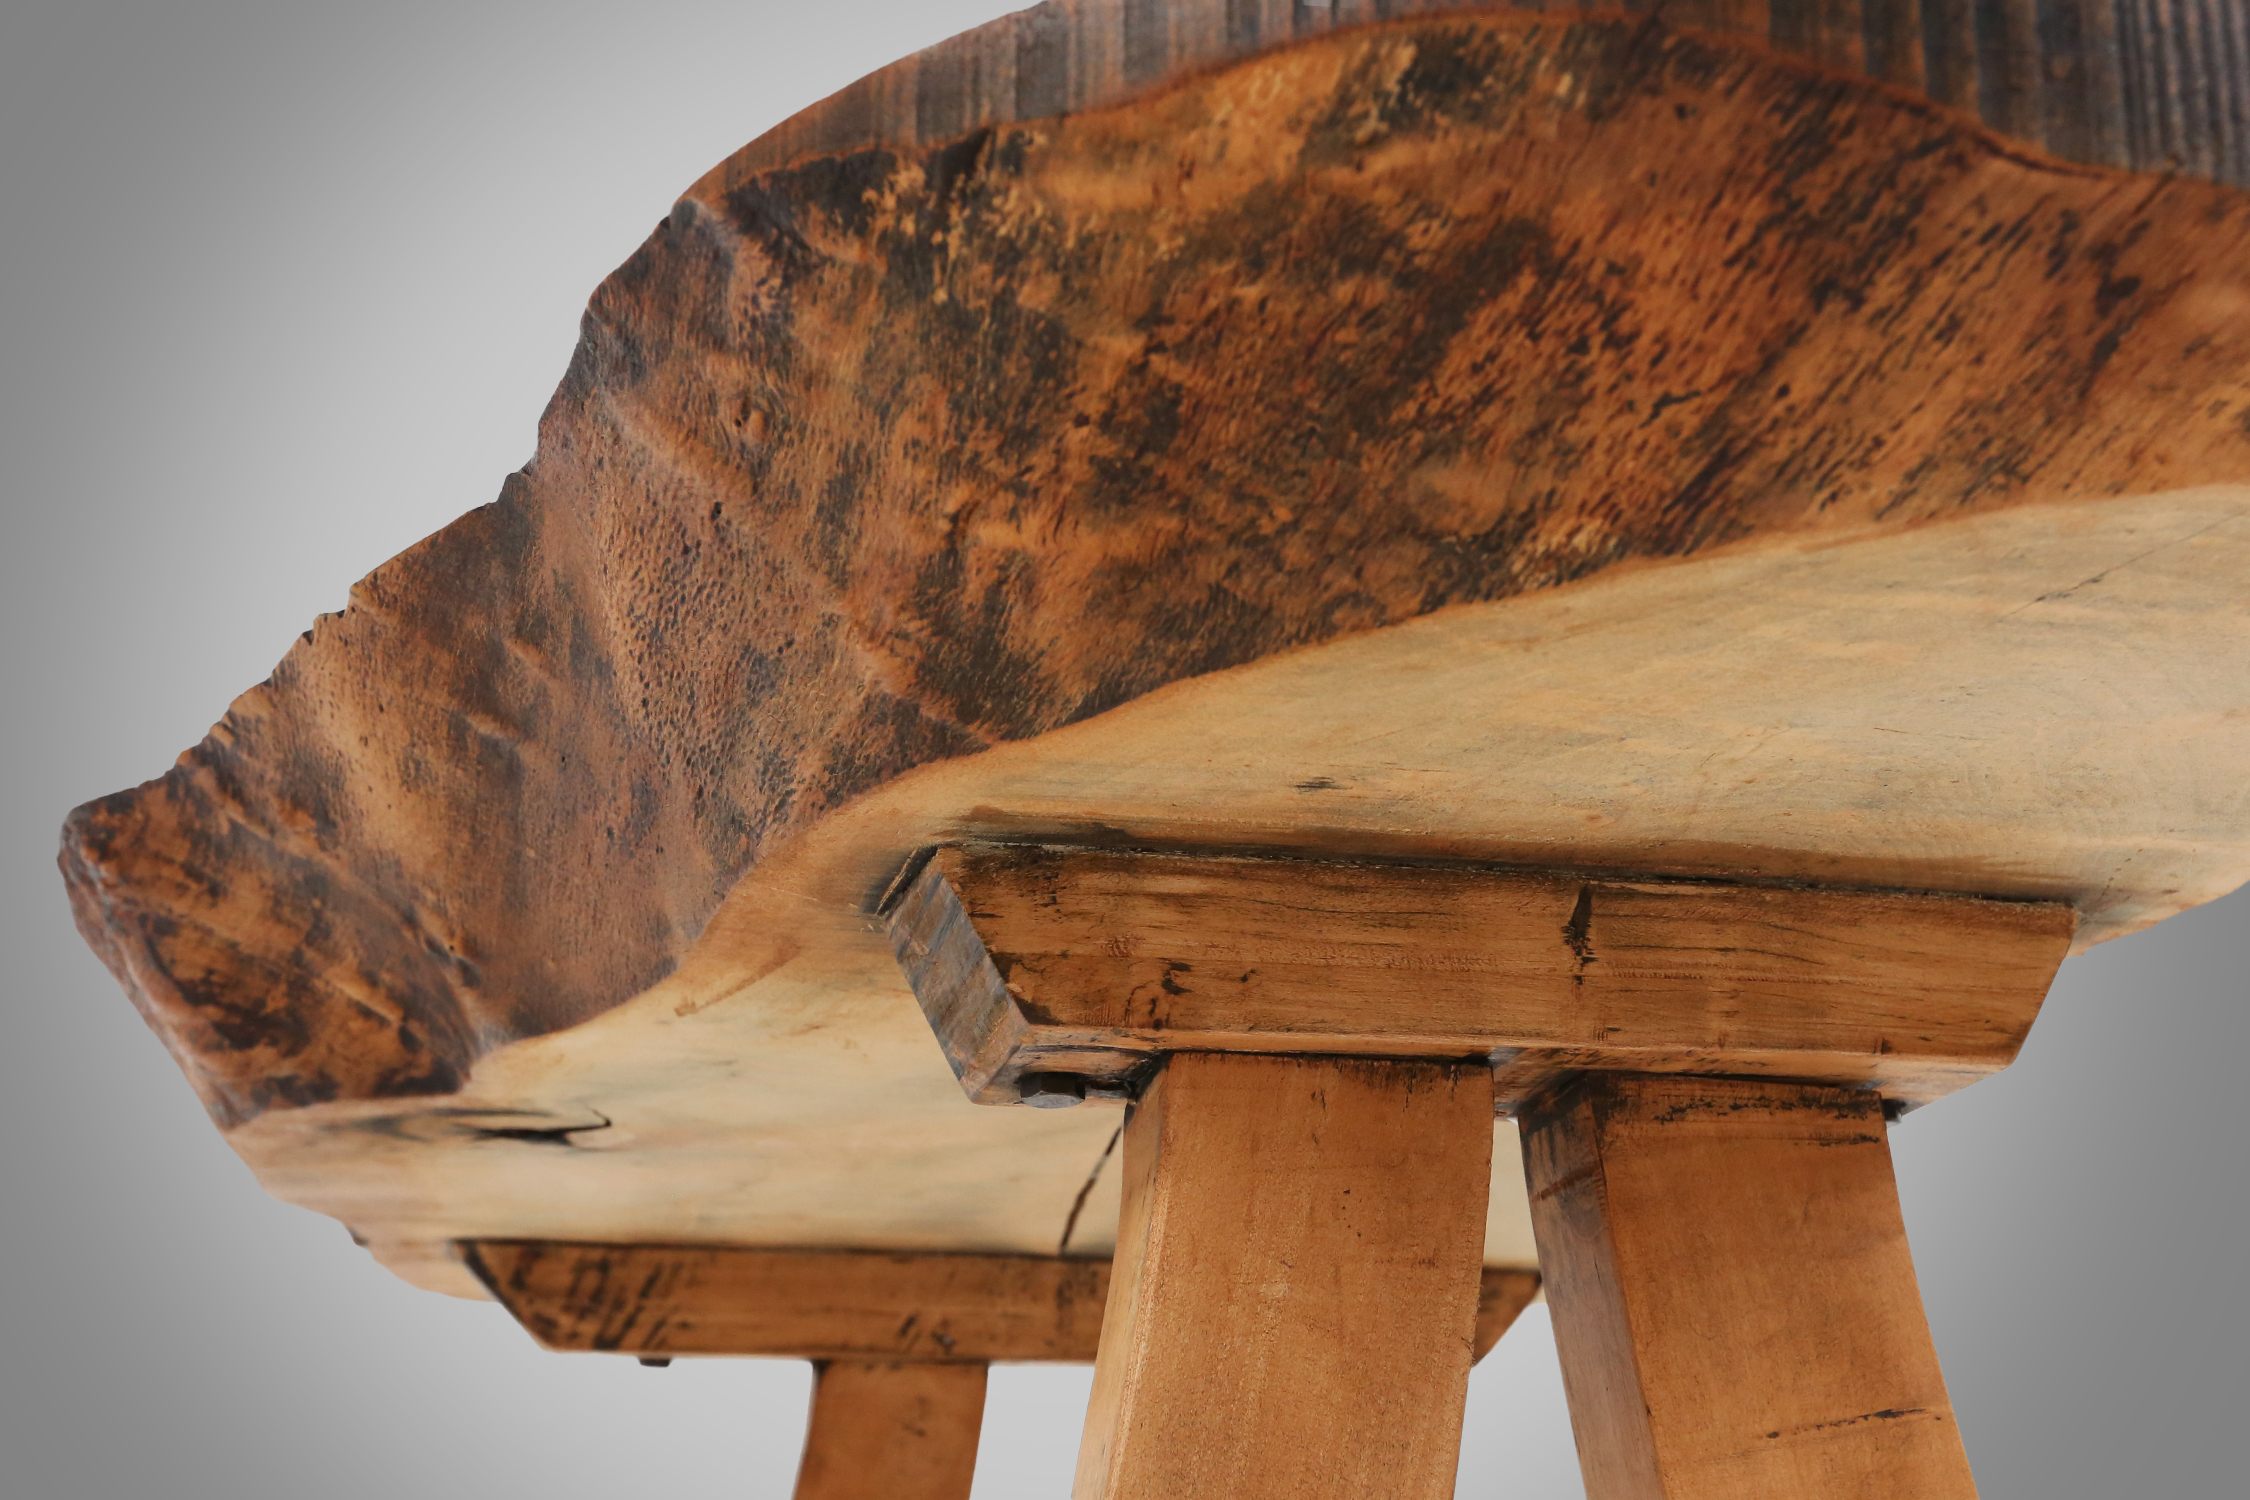 Sculptural carved tree trunk coffee table in oak, France ca. 1850thumbnail